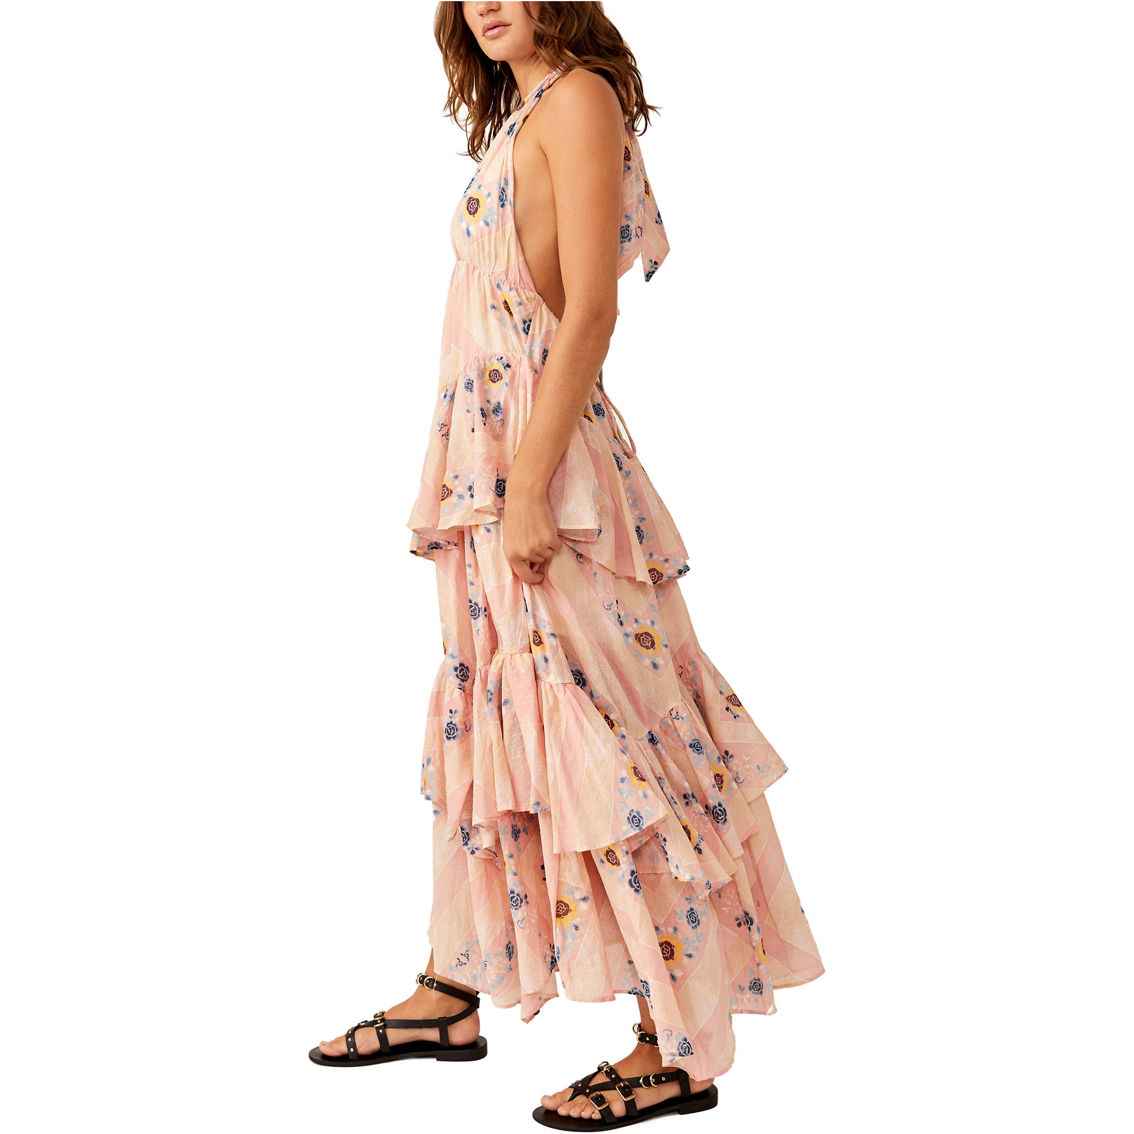 Free People Stop Time Maxi Dress - Image 3 of 4